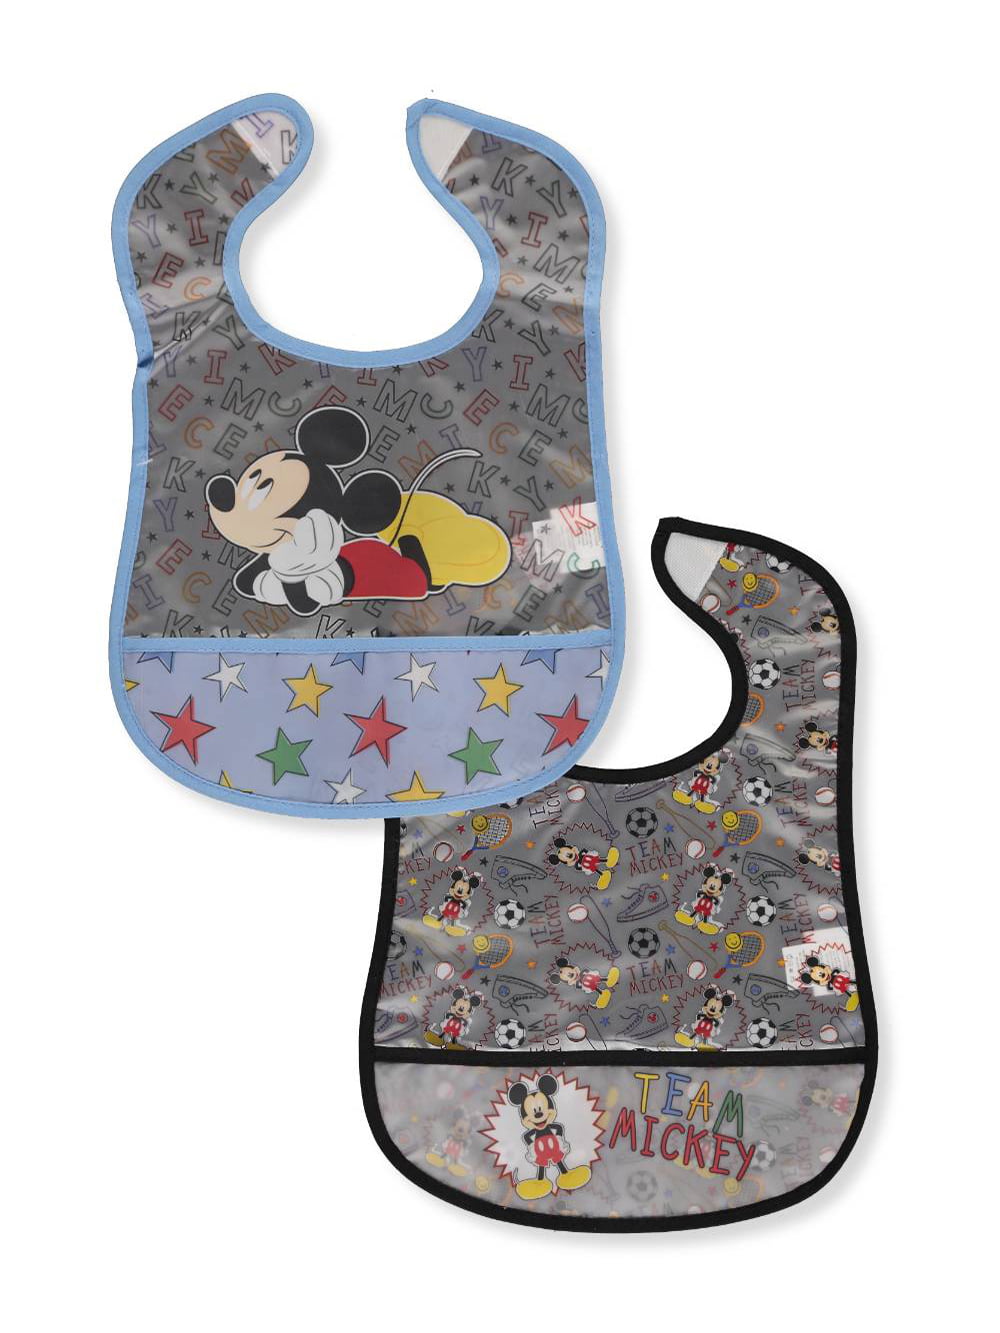 Crumb Catcher Pocket Disney Mickey Mouse 2Piece Printed Frosted Water Proof Peva Bib 